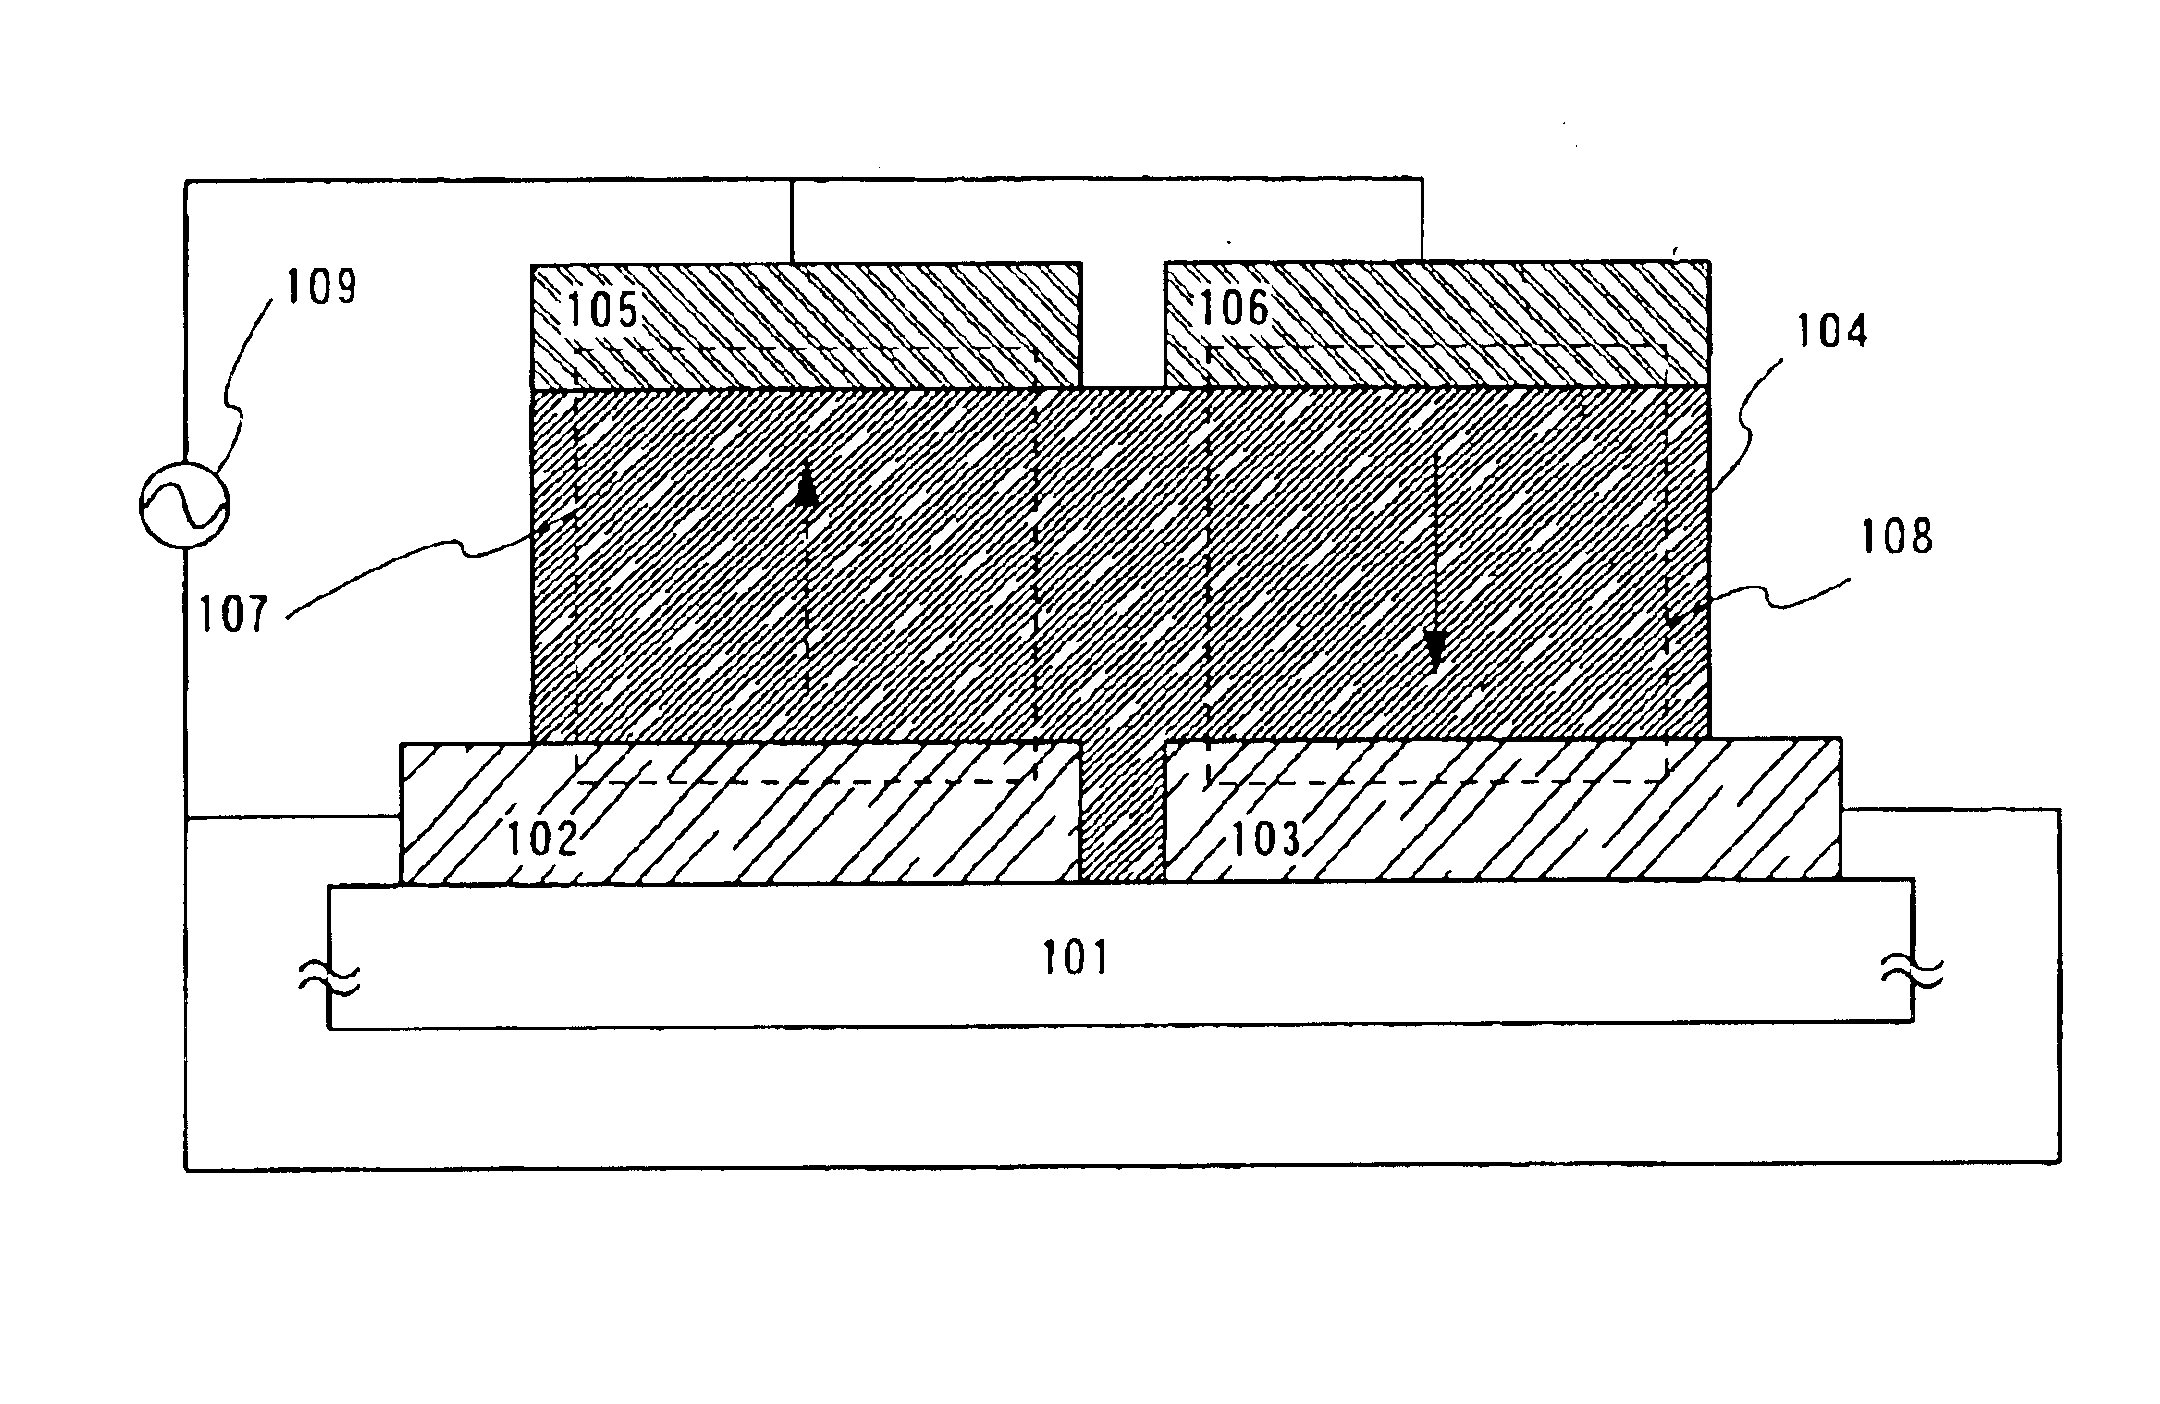 Light emitting device driving by alternating current in which light emission is always obtained